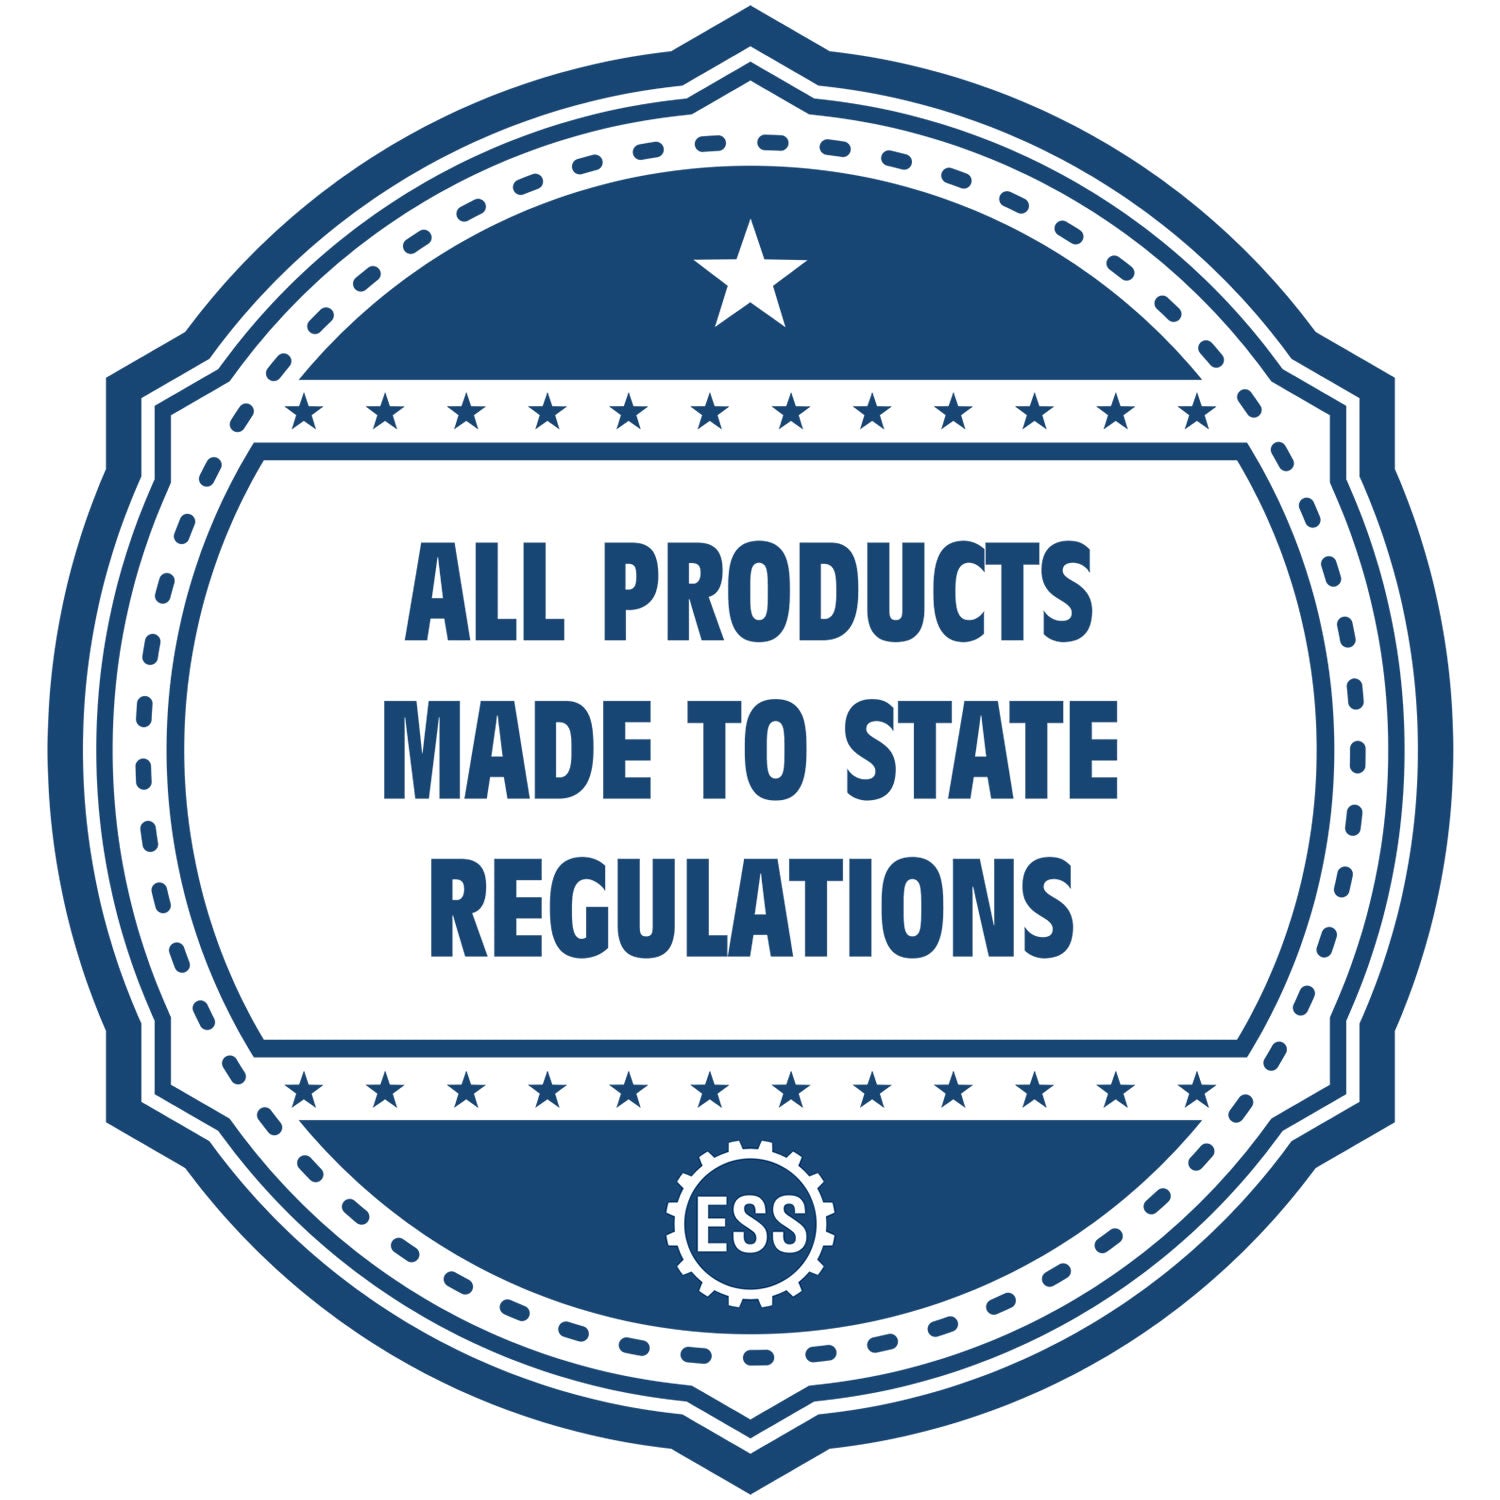 An icon or badge element for the Self-Inking Mississippi PE Stamp showing that this product is made in compliance with state regulations.